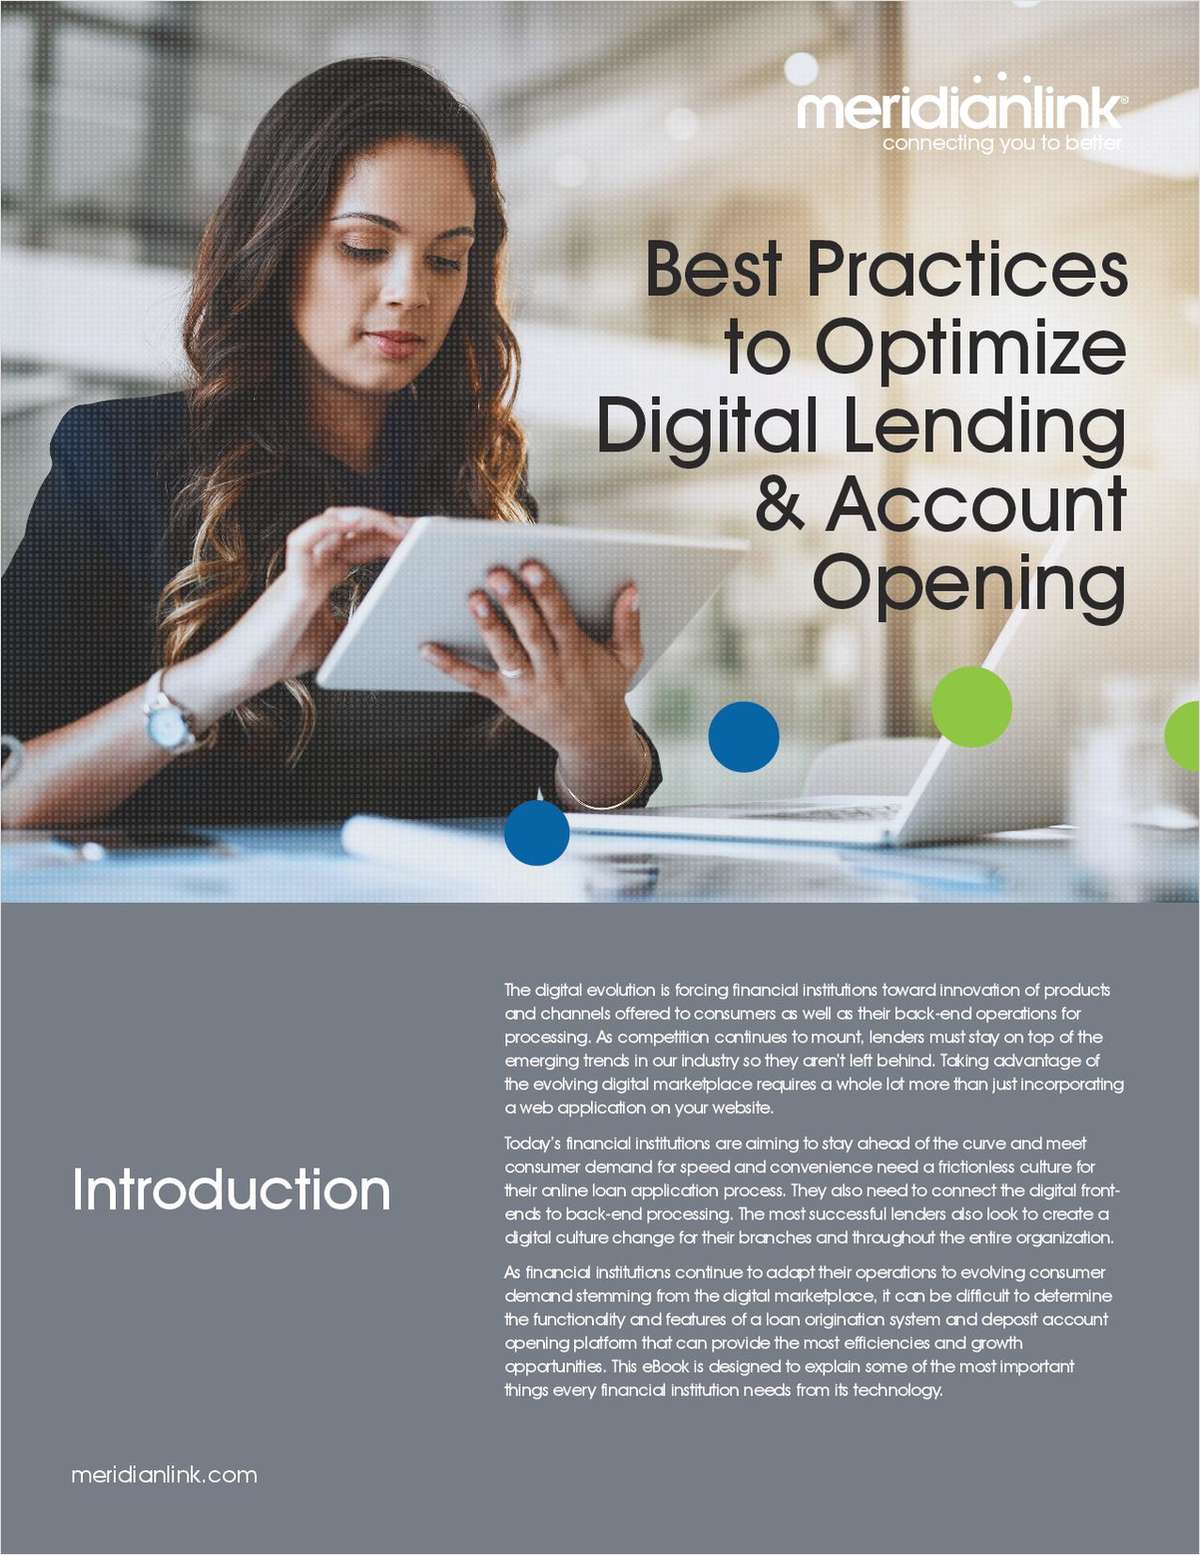 Best Practices to Optimize Digital Lending & Account Opening